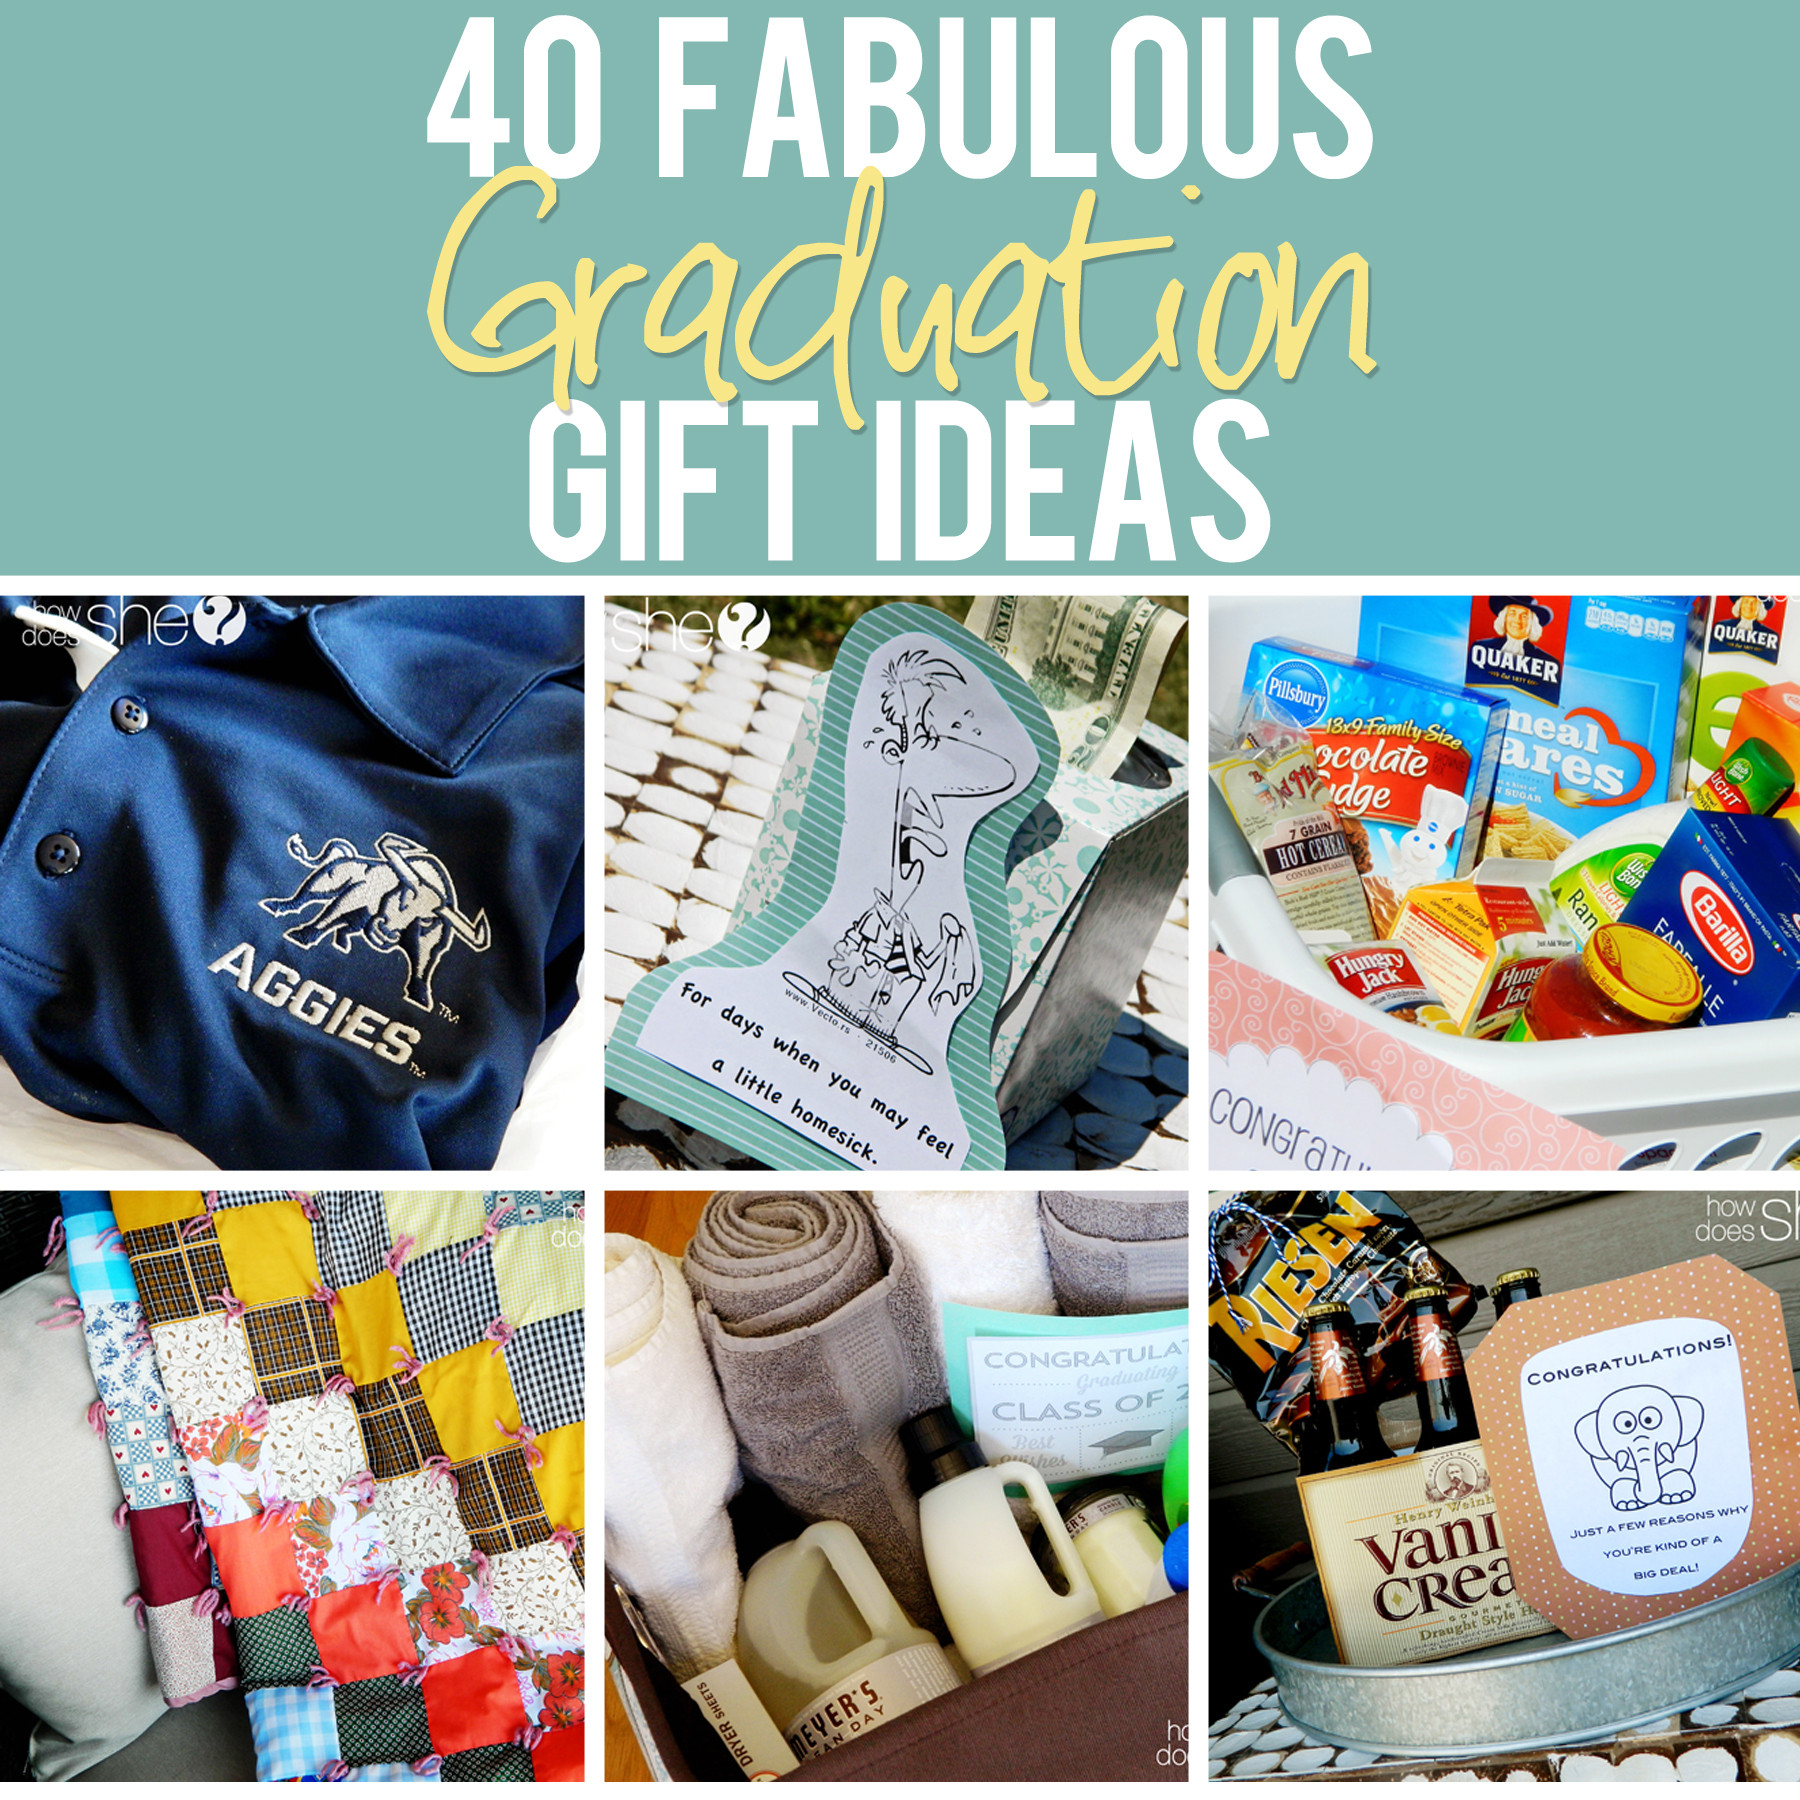 College Graduation Gift Ideas For Girls
 Graduation Gift Ideas that are Perfect for Any Graduate